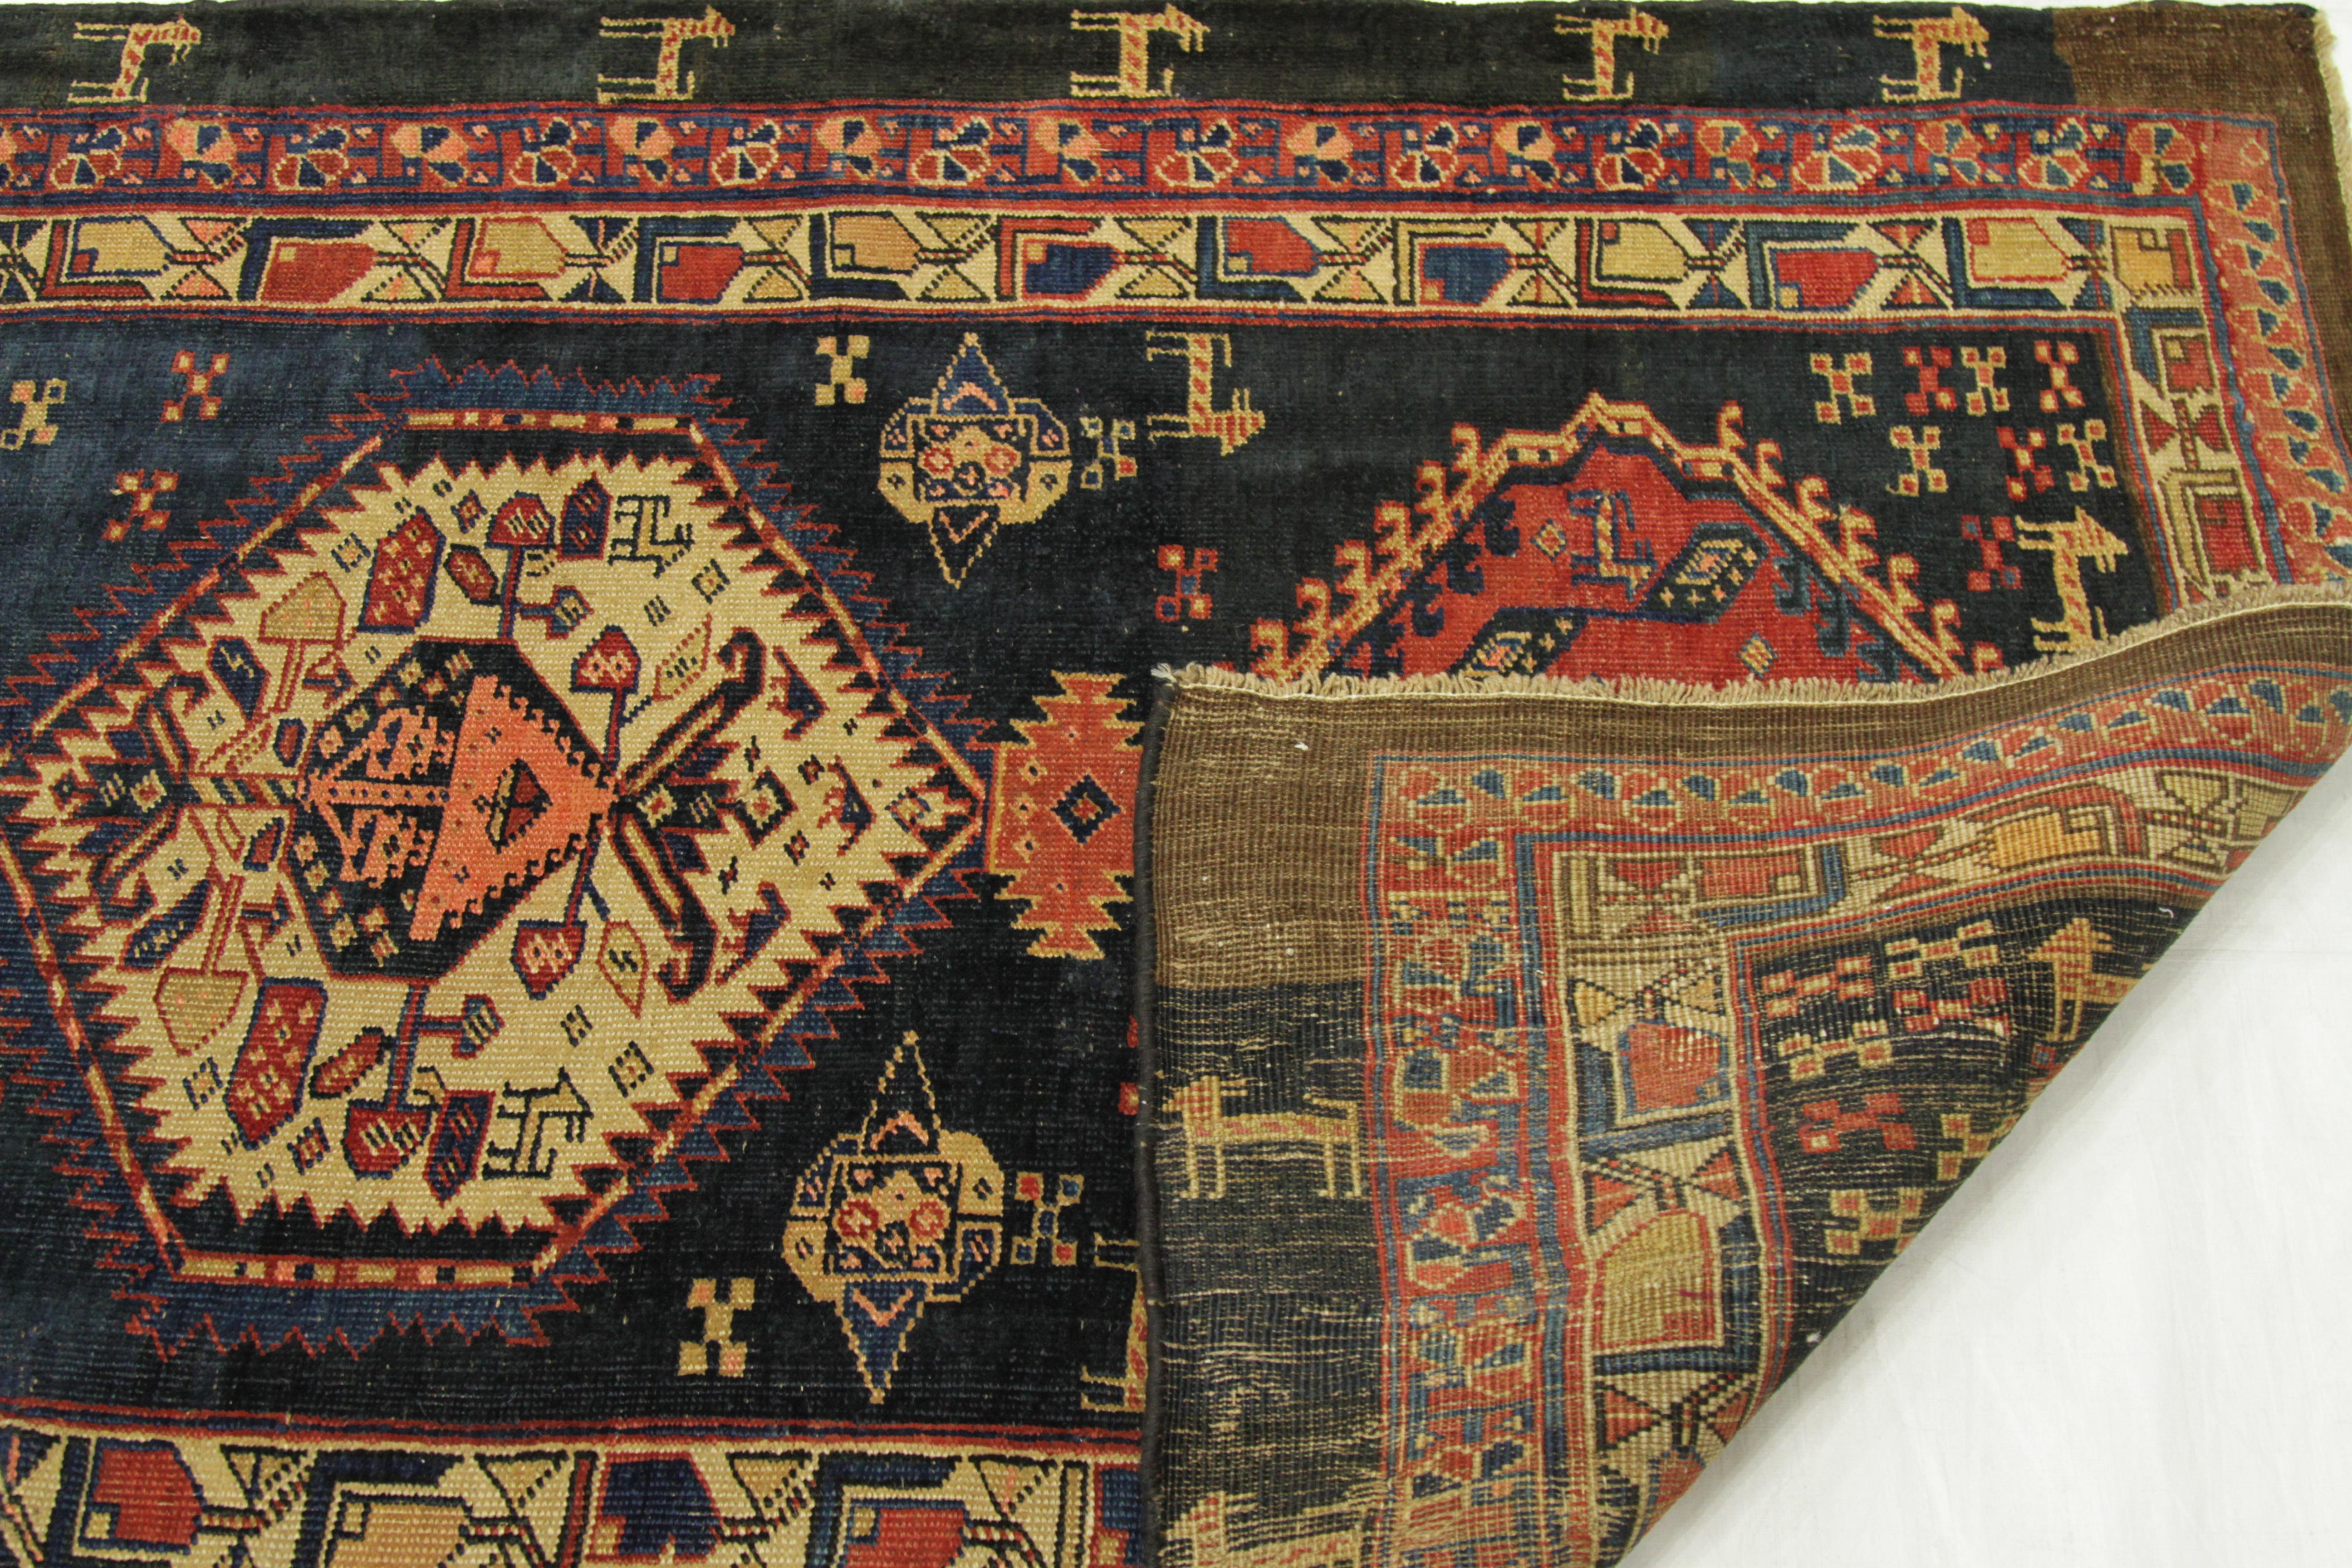 Antique Persian Rug Azerbaijan Design with Magnificent Jewel Patterns circa 1900 For Sale 1